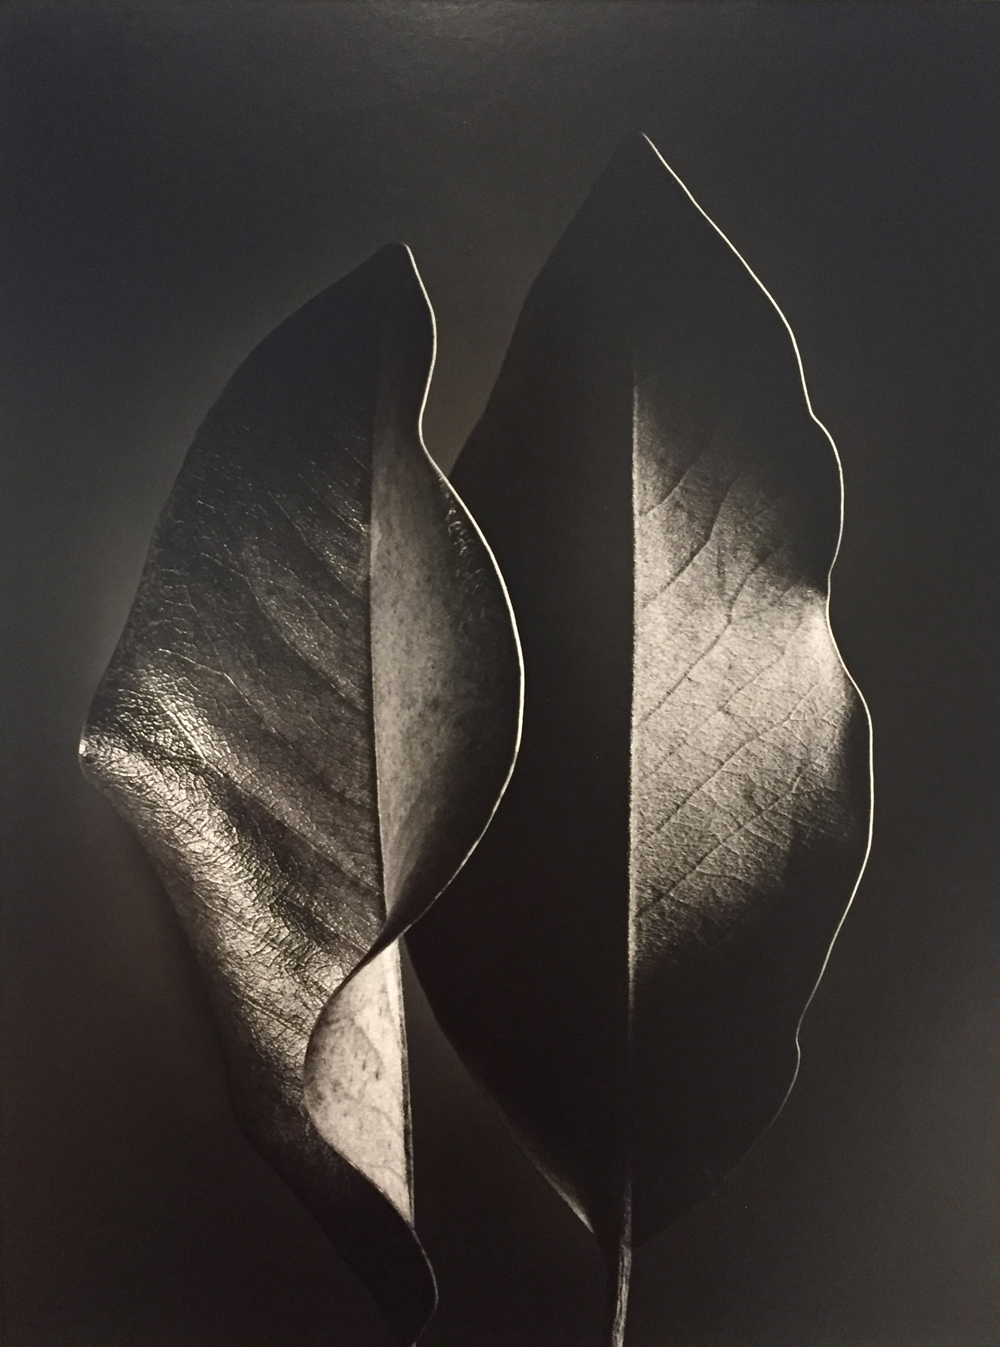 Ruth Bernhard, Two Leaves, 1952, toned gelatin silver print, 13.75 x 10.5 inches, signed by artist, $6000.